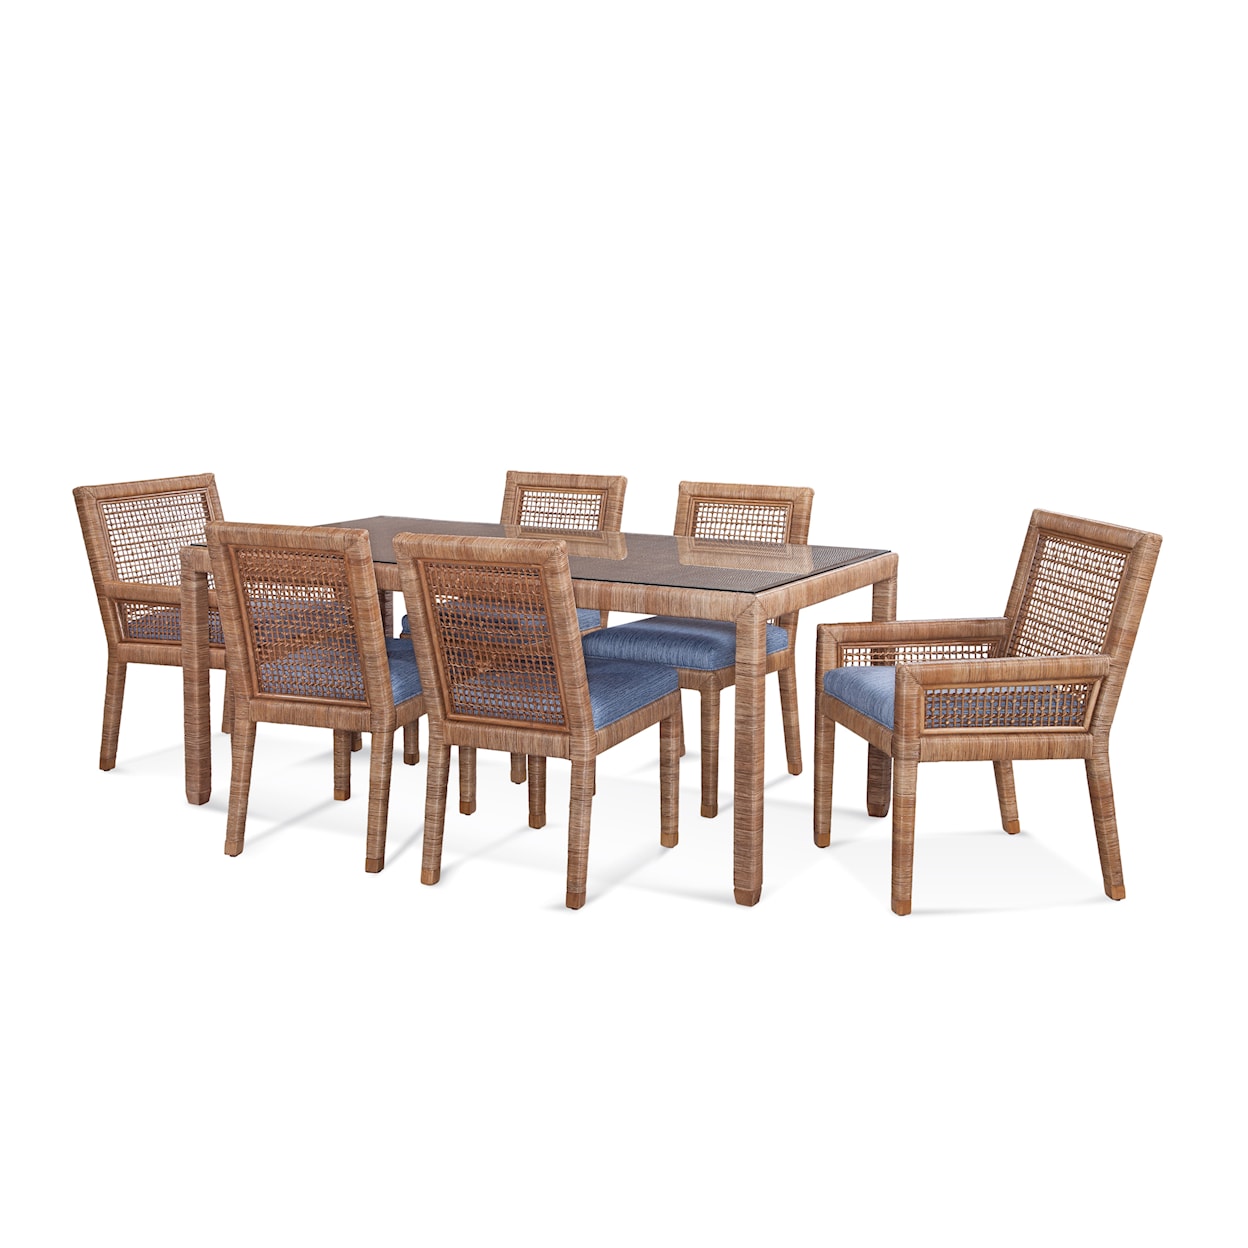 Braxton Culler Pine Isle Side Dining Chair